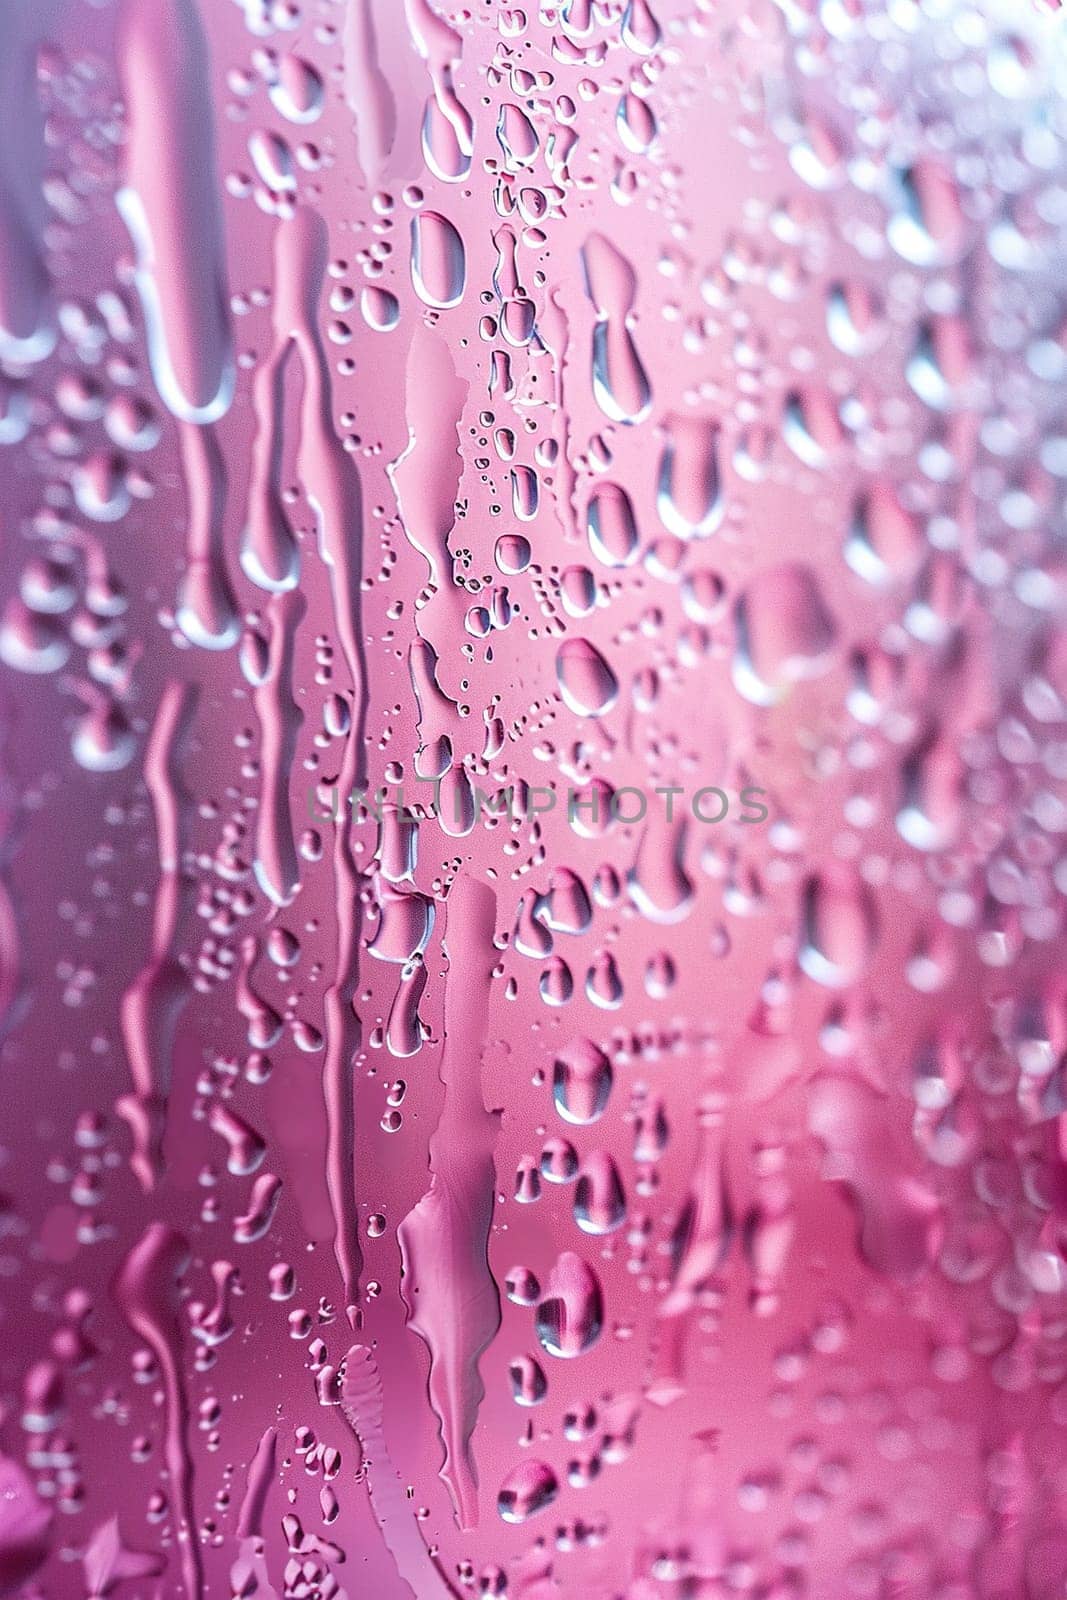 Foggy pink glass with drops and streaks of water. Vertical background for tik tok, instagram, stories. Generated by artificial intelligence by Vovmar